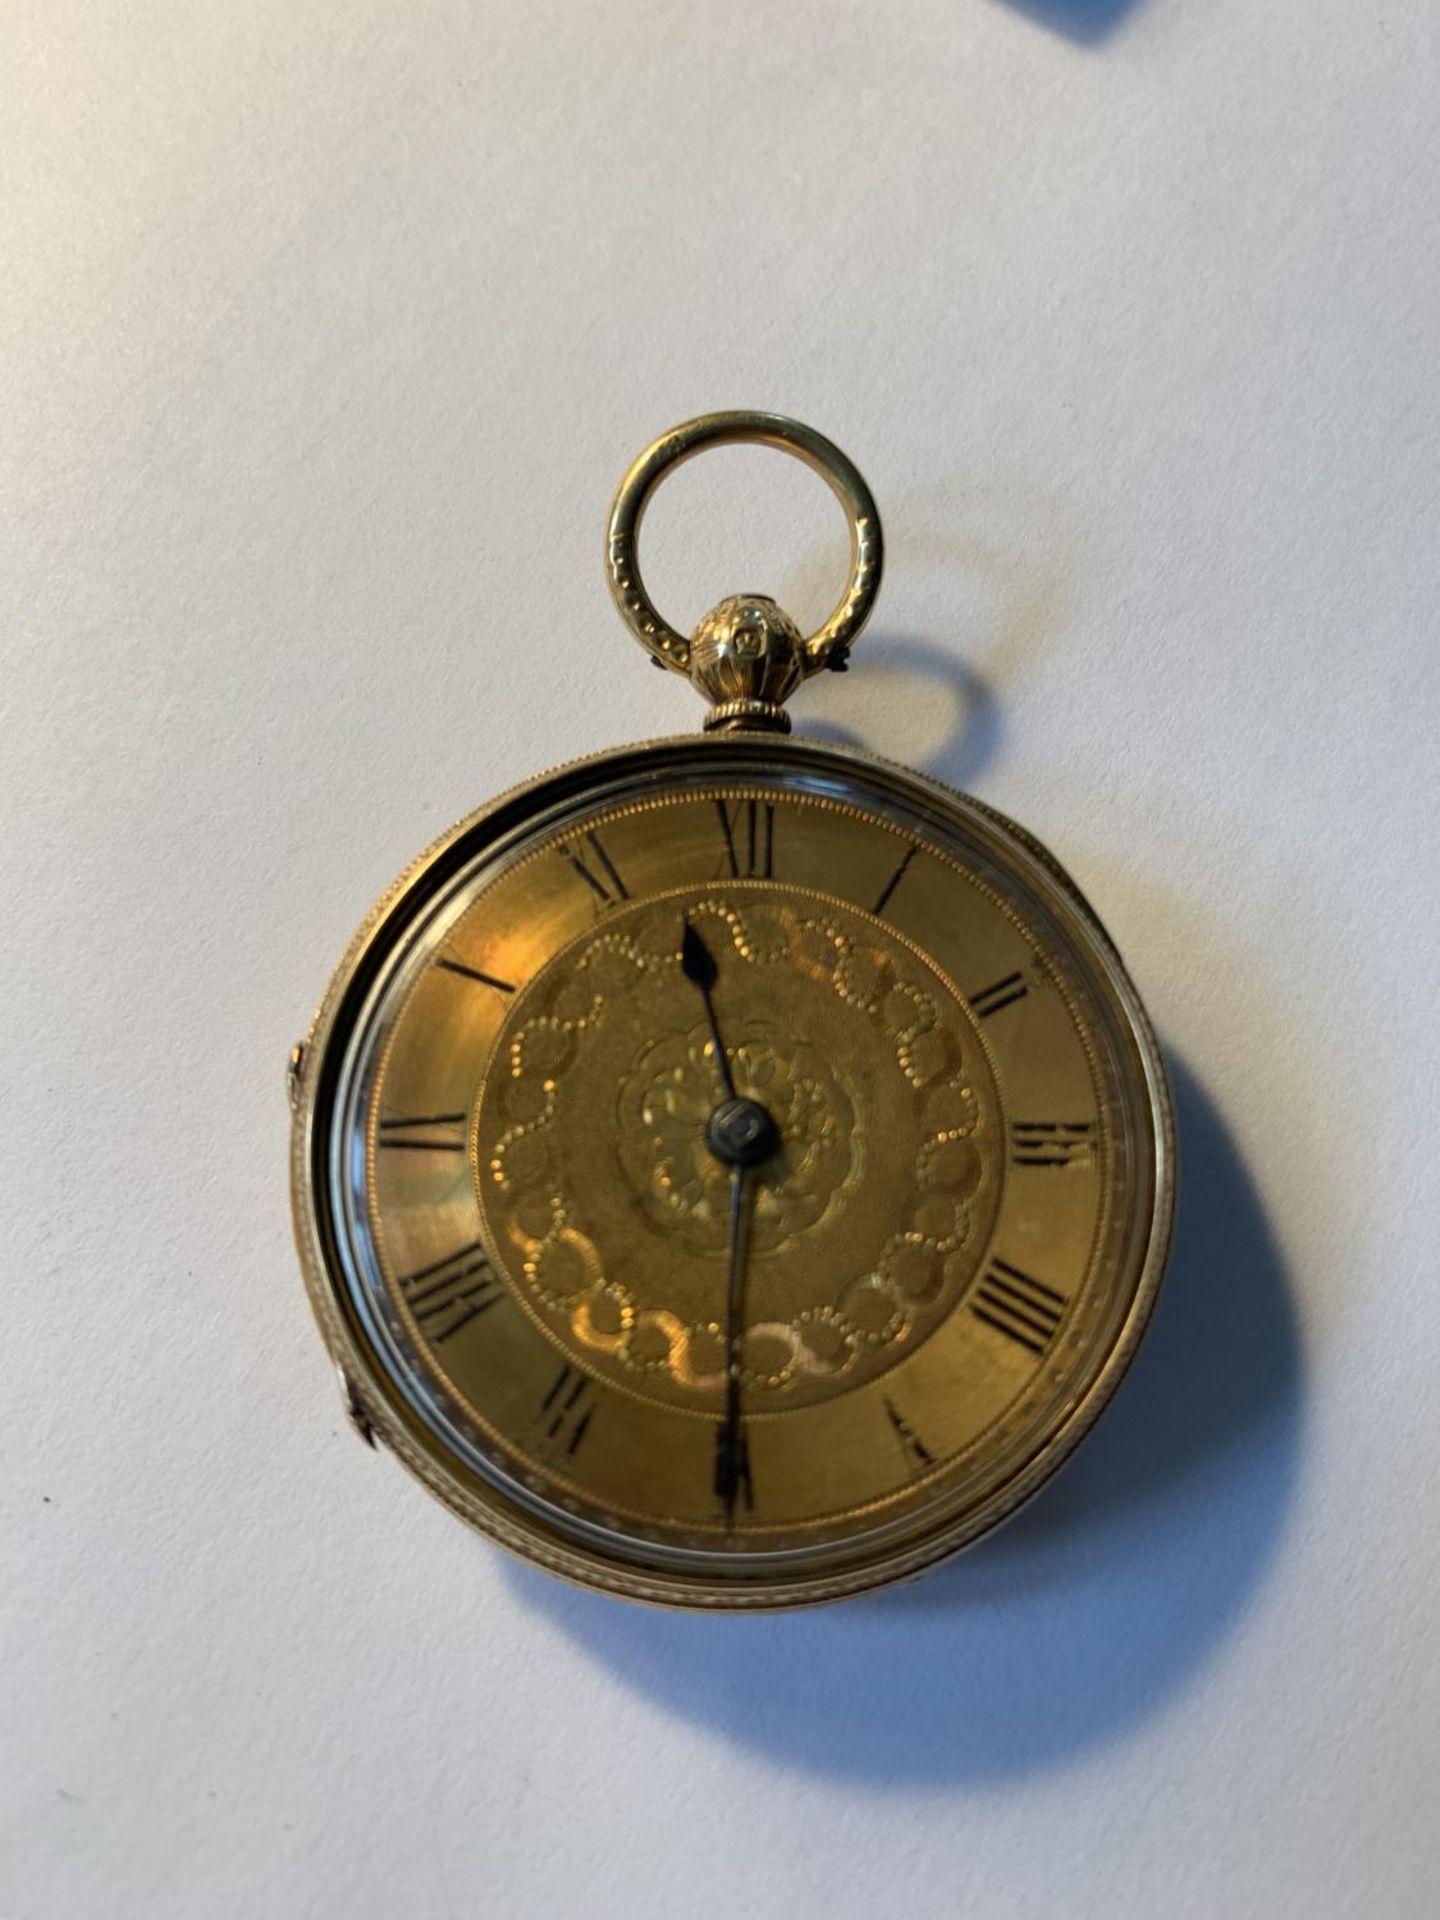 AN 18 CARAT GOLD MARKED CHESTER POCKET WATCH WITH DECORATIVE FACE AND ROMAN NUMERALS, KEY AND - Image 2 of 7